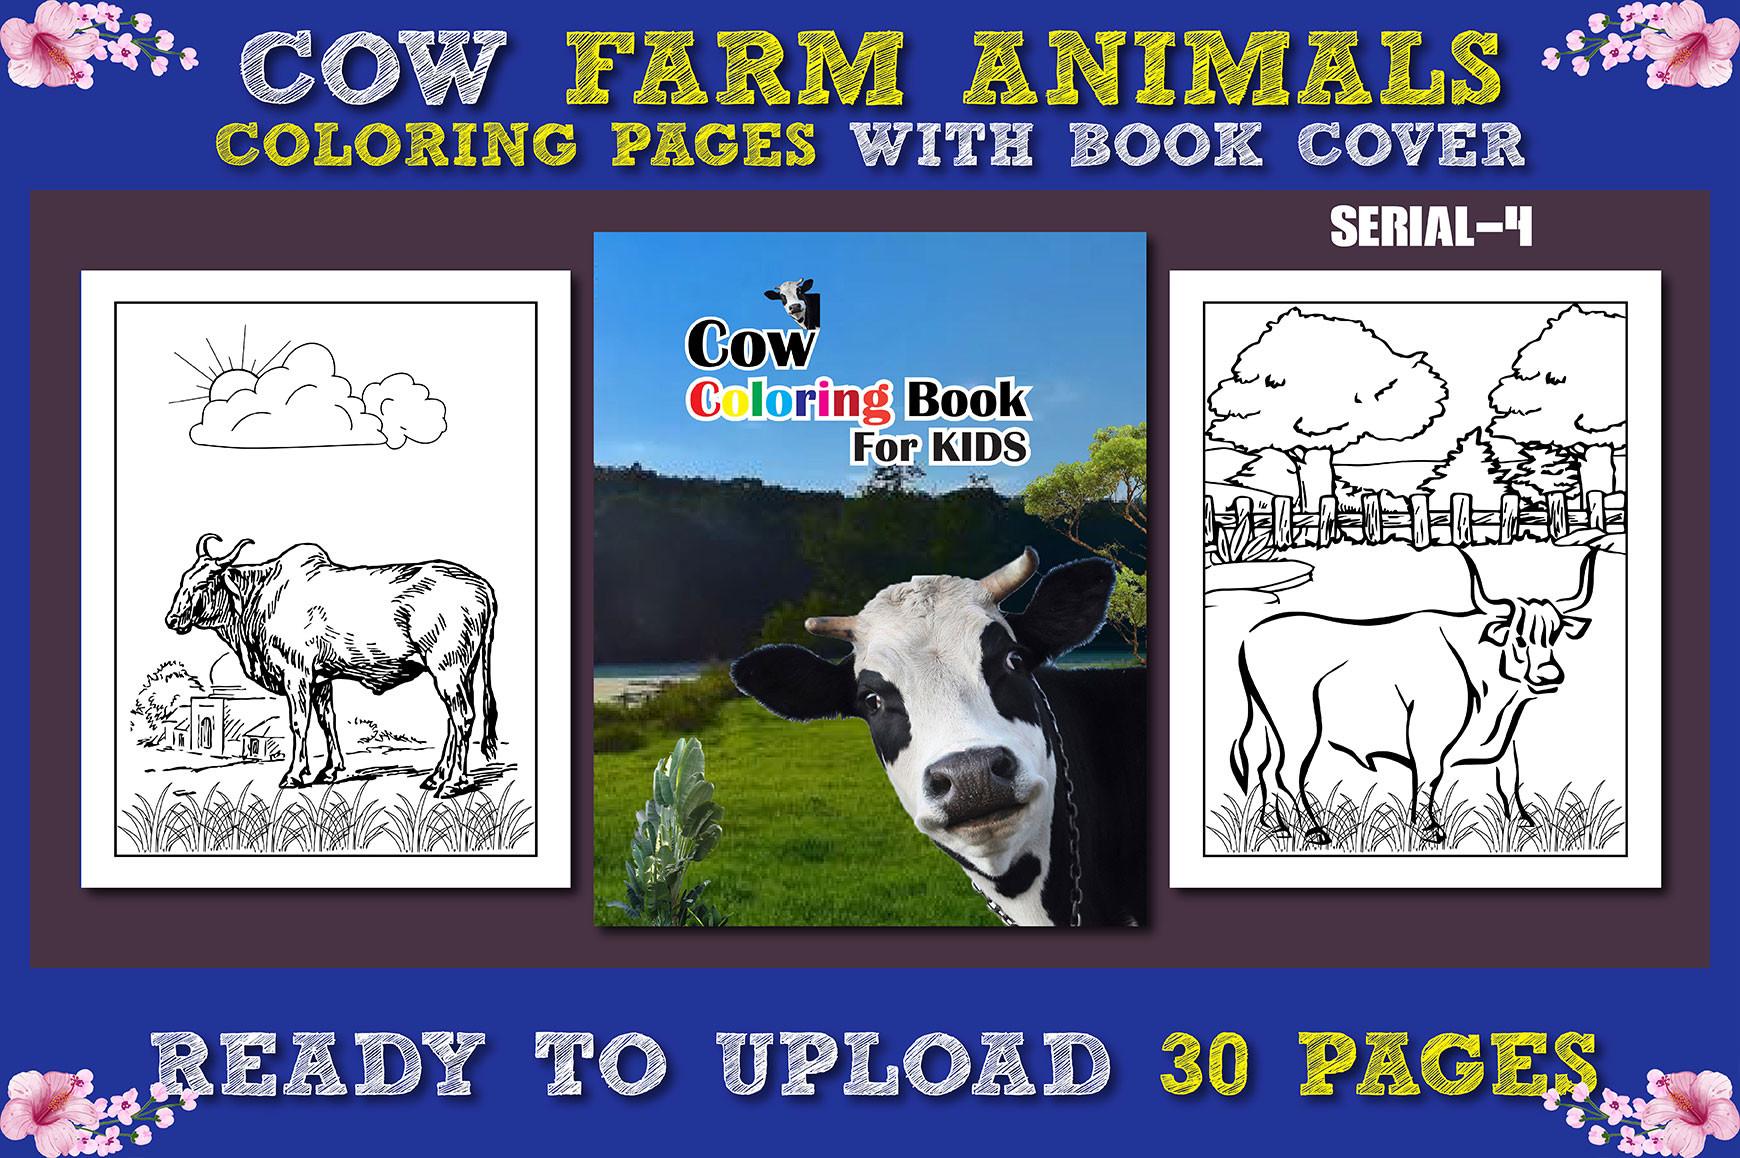 Cow Farm Animals Coloring Pages Vol-4